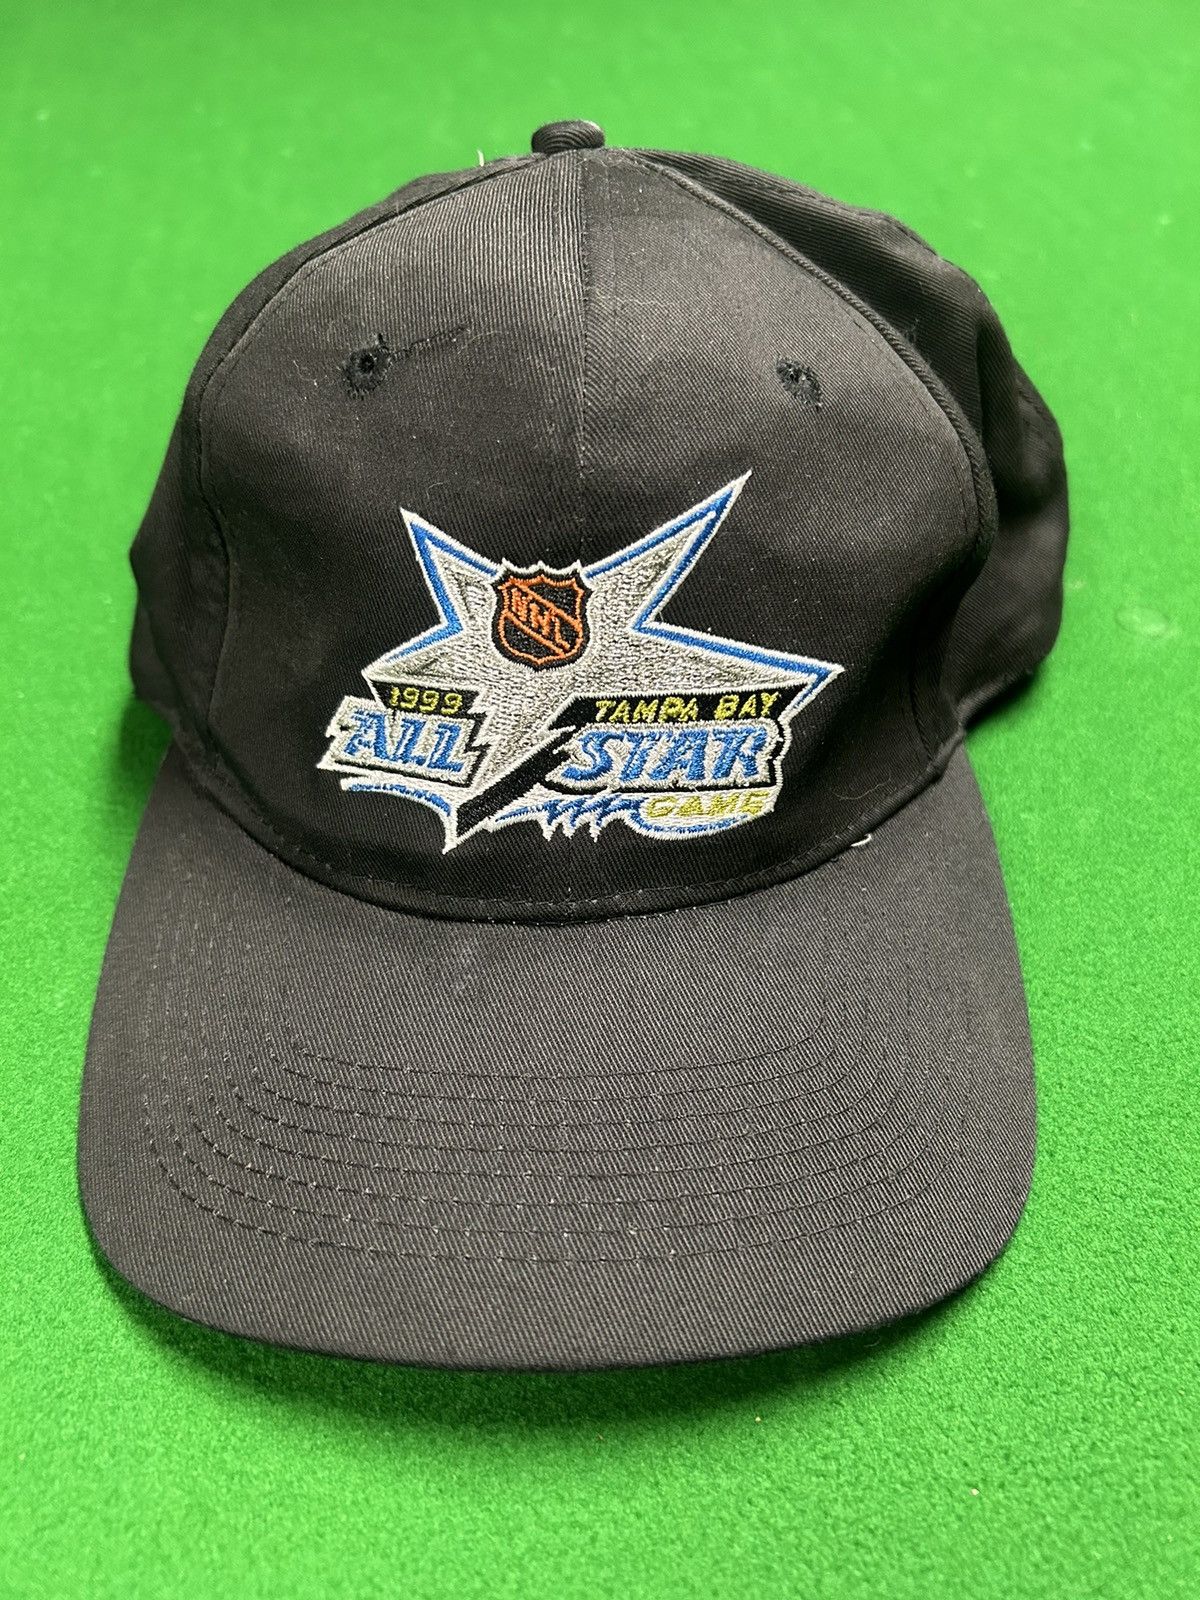 1999 NHL All Star Tampa Bay Hat  Classifieds for Jobs, Rentals, Cars,  Furniture and Free Stuff